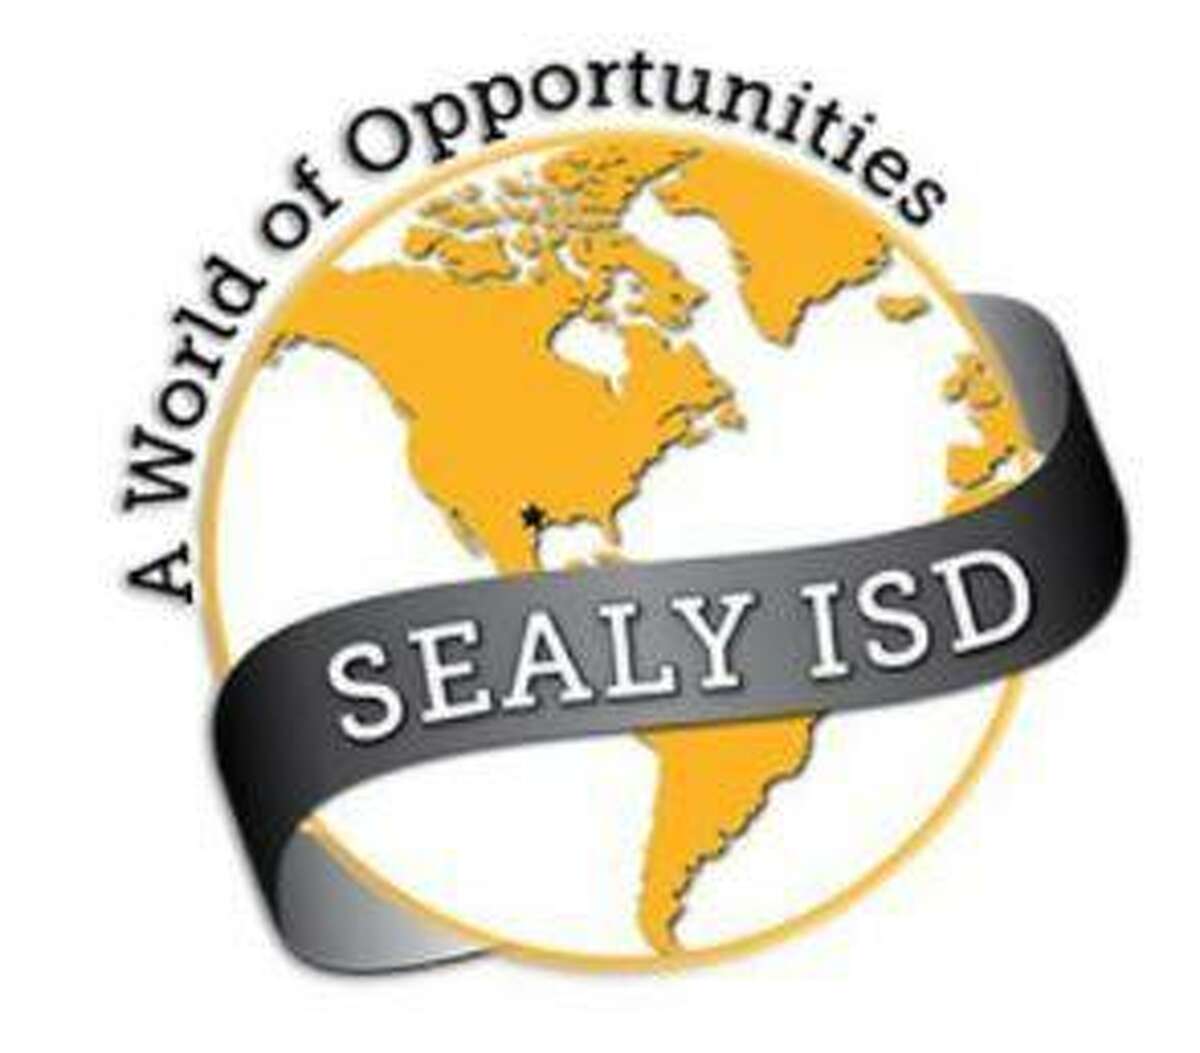 Sealy ISD in Brazos County has temporarily stopped in-person instruction Friday through Tuesday at all of its schools due to the spread of COVID during the omicron surge.